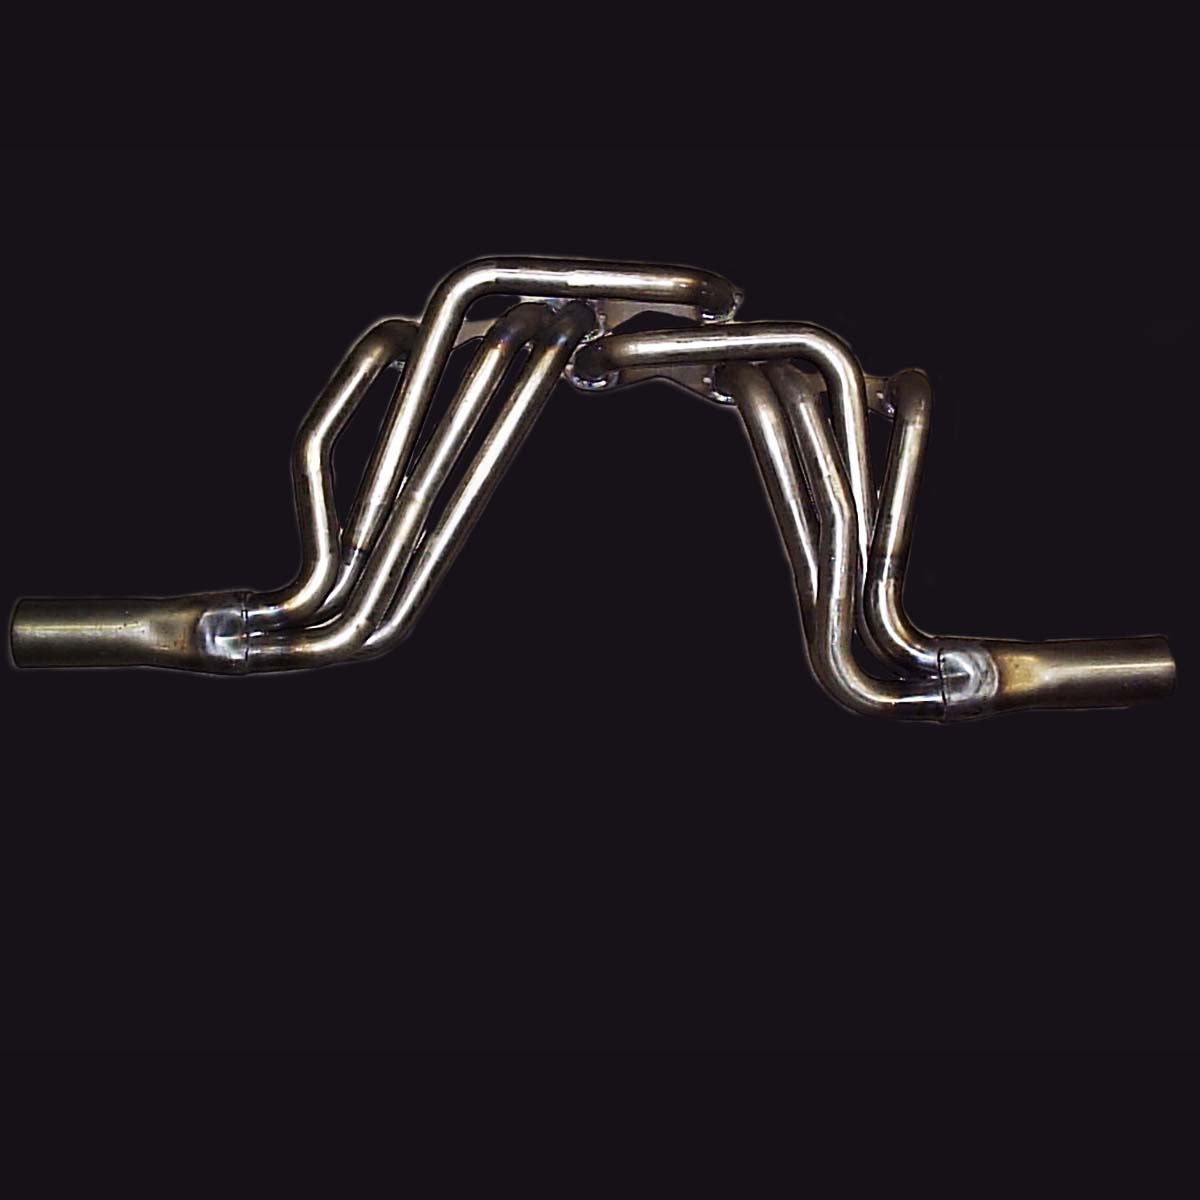 Clear Image Quad 1 Header 1 3/4" Stainless Steel Impala SS